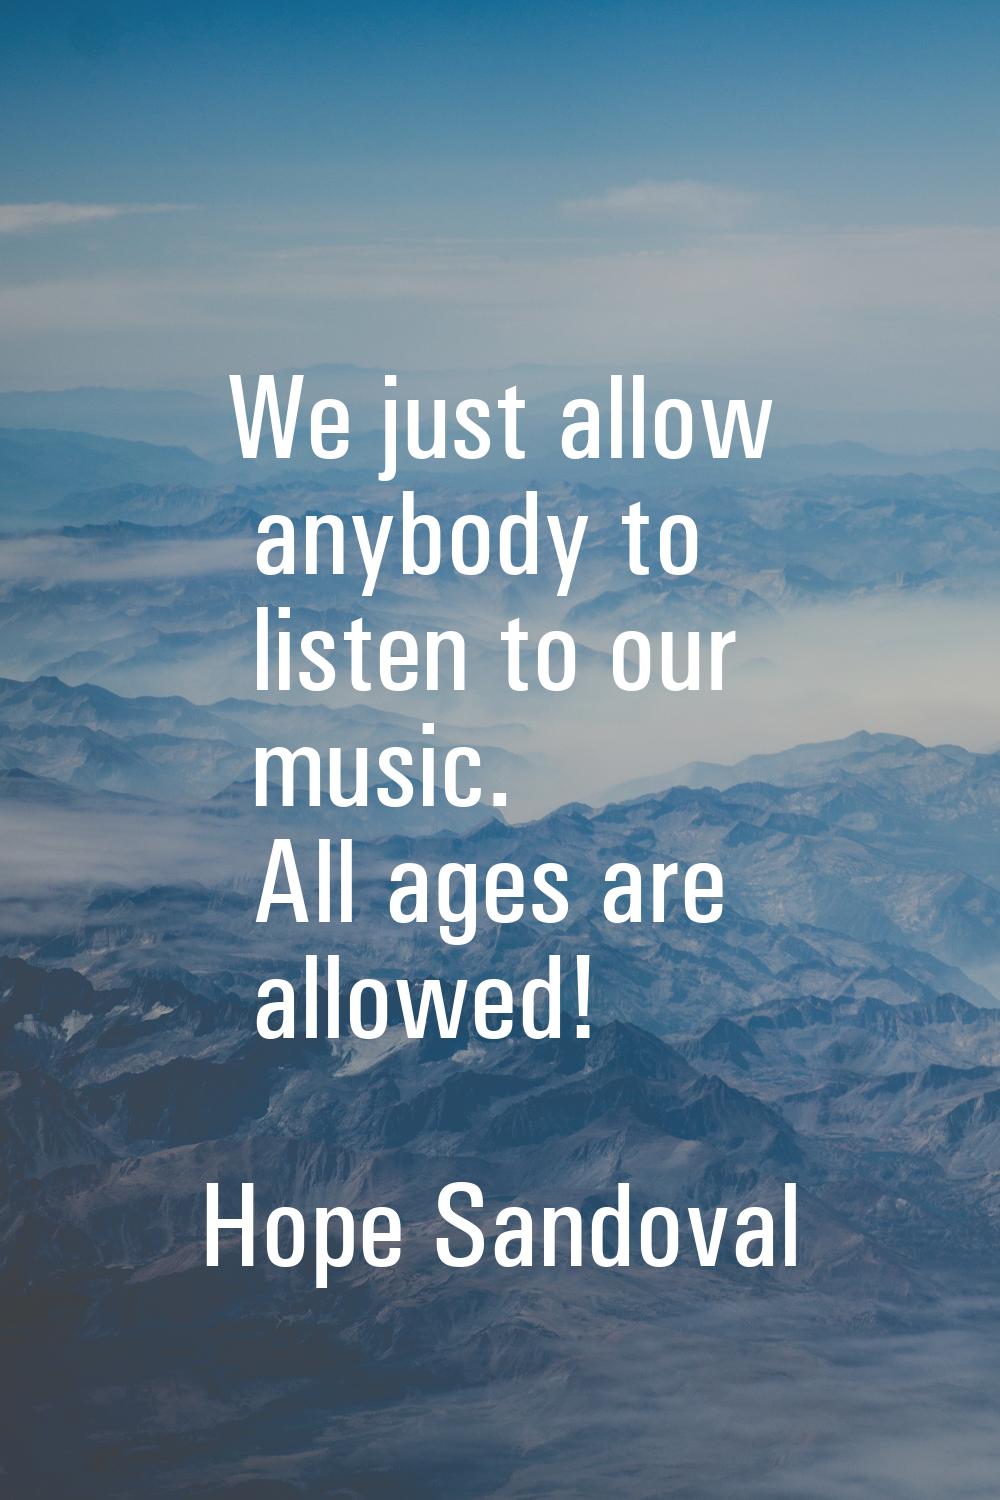 We just allow anybody to listen to our music. All ages are allowed!